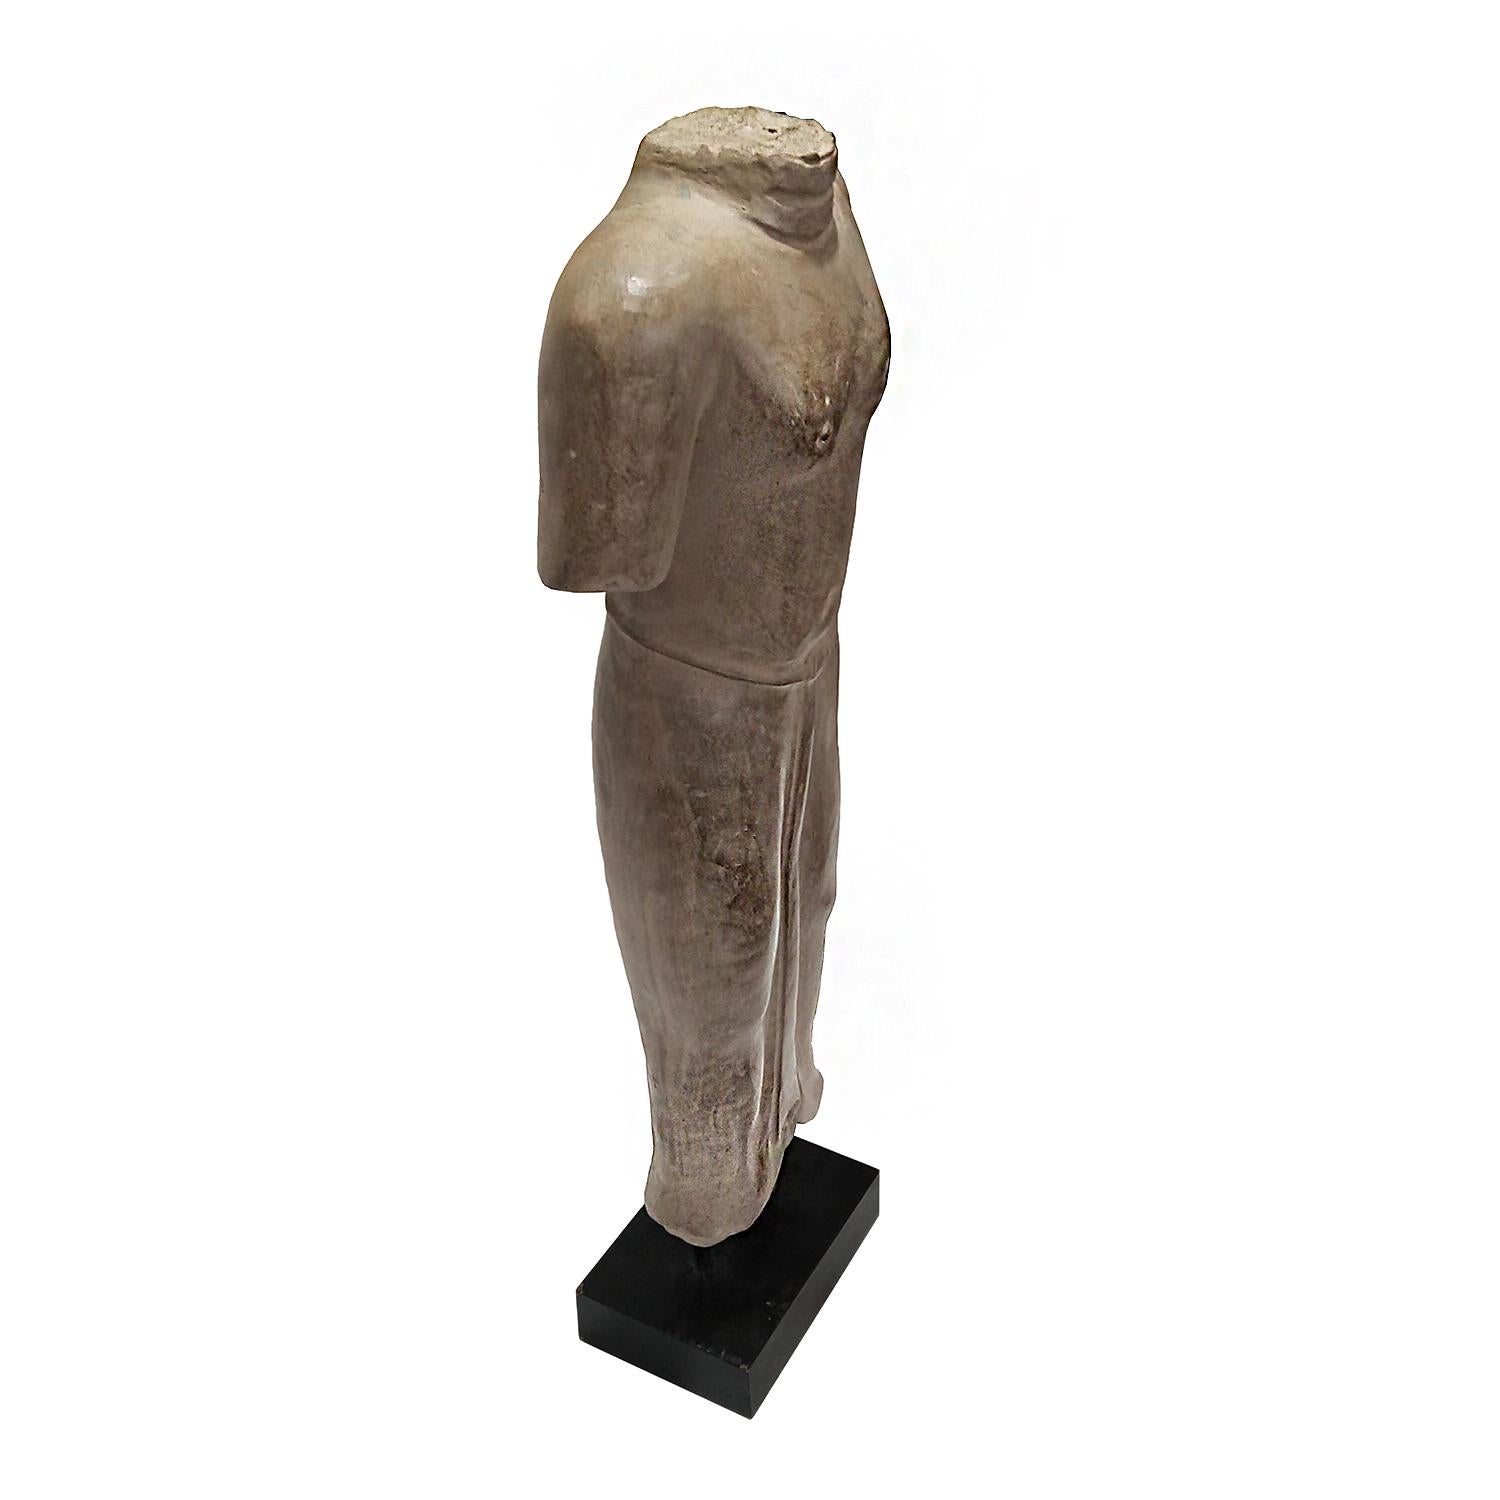 Contemporary Hand-Carved Sandstone Tabletop Sculpture from Thailand